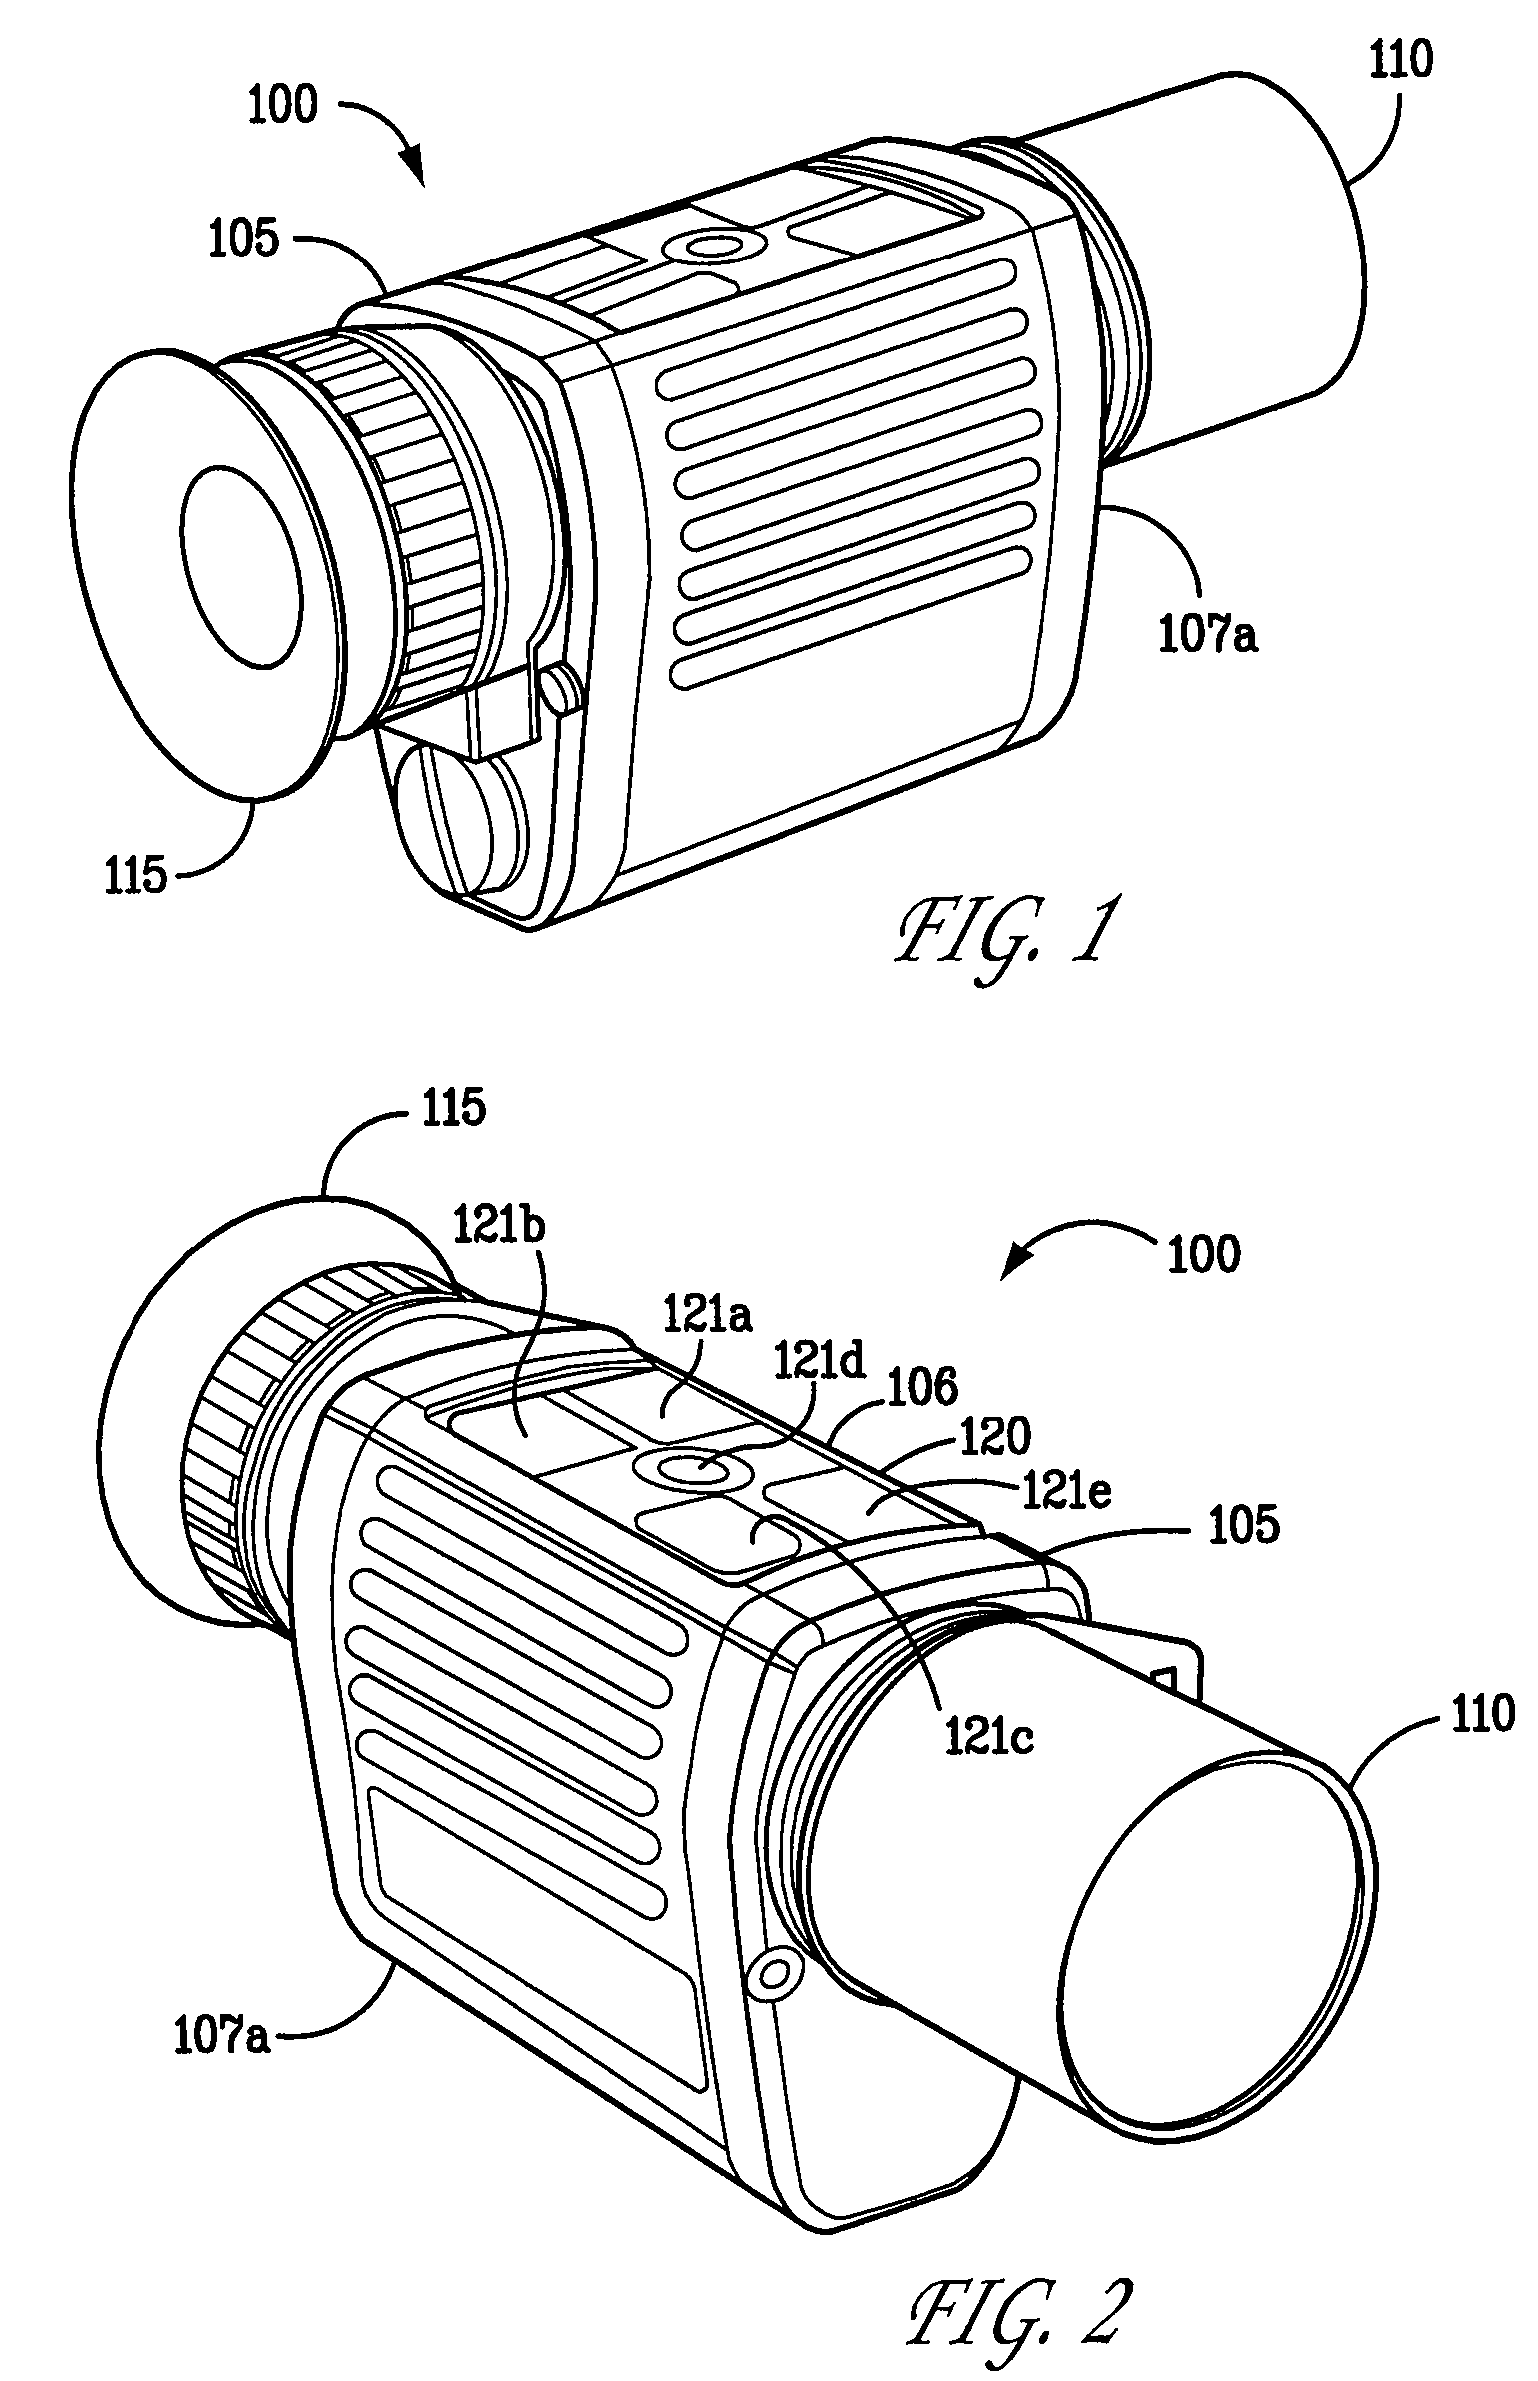 Low-light viewing device for displaying image based on visible and near infrared light